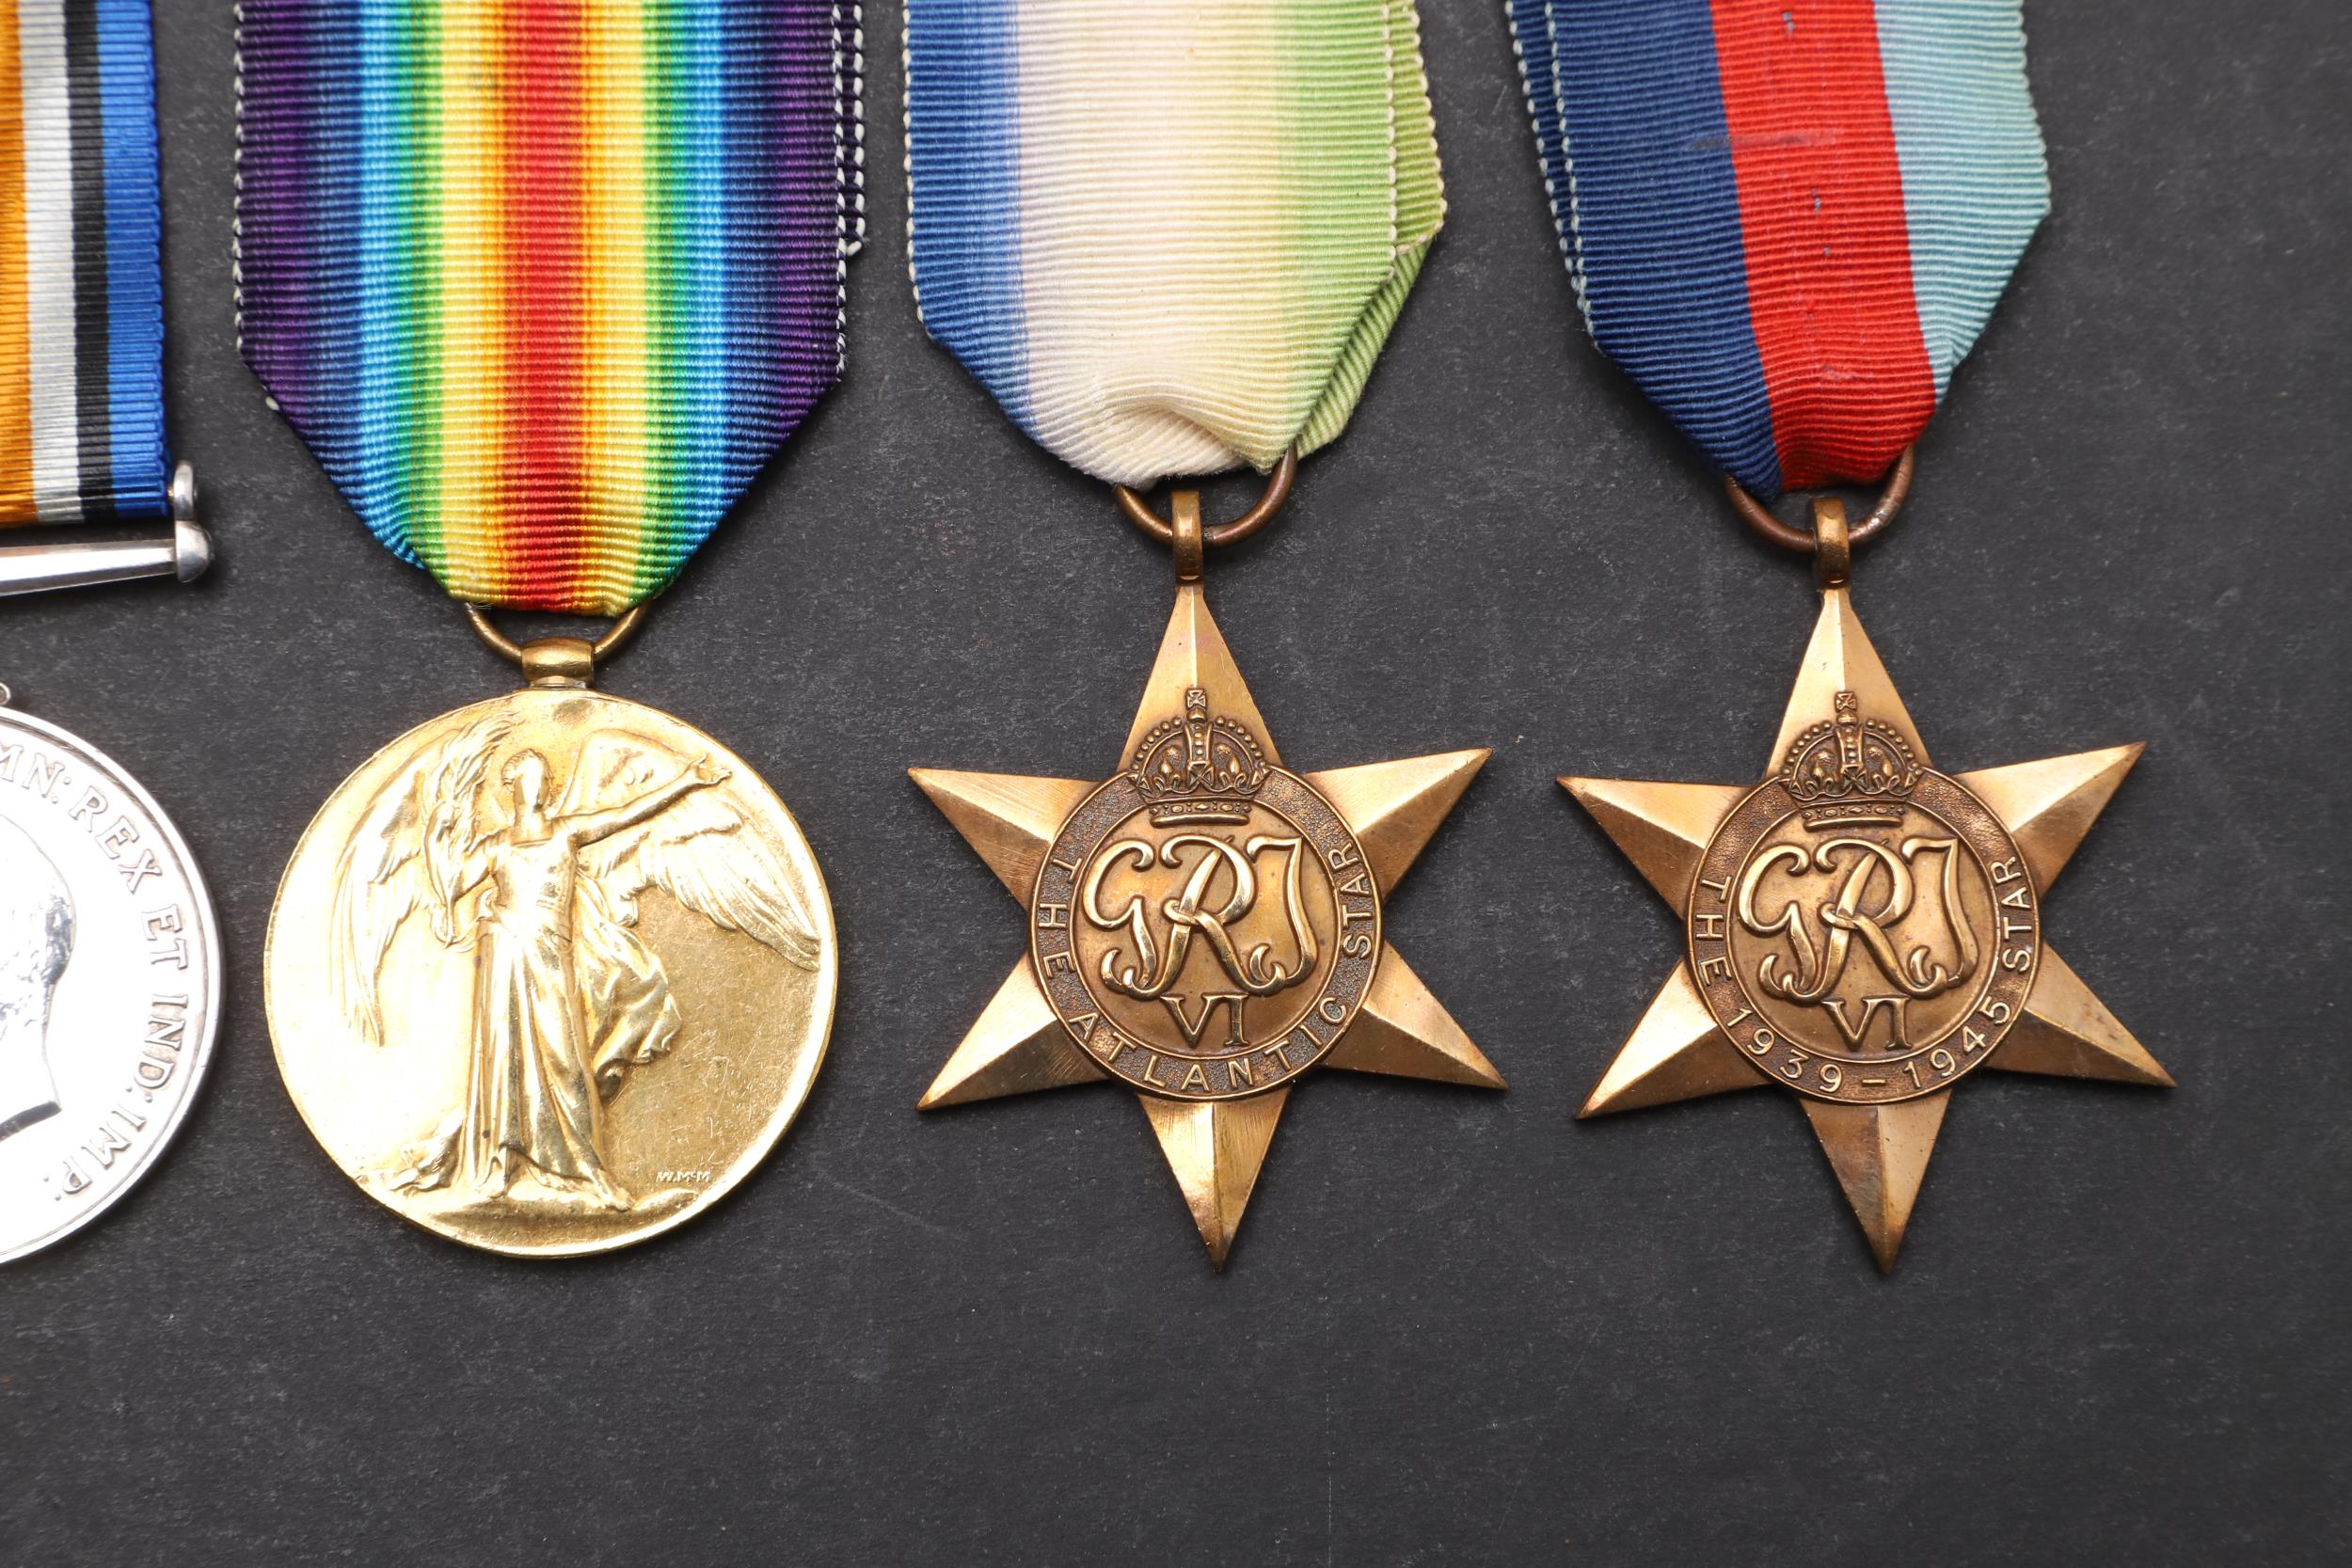 A FIRST WORLD WAR SILVER WAR BADGE AND A SMALL COLLECTION OF MEDALS. - Image 3 of 7